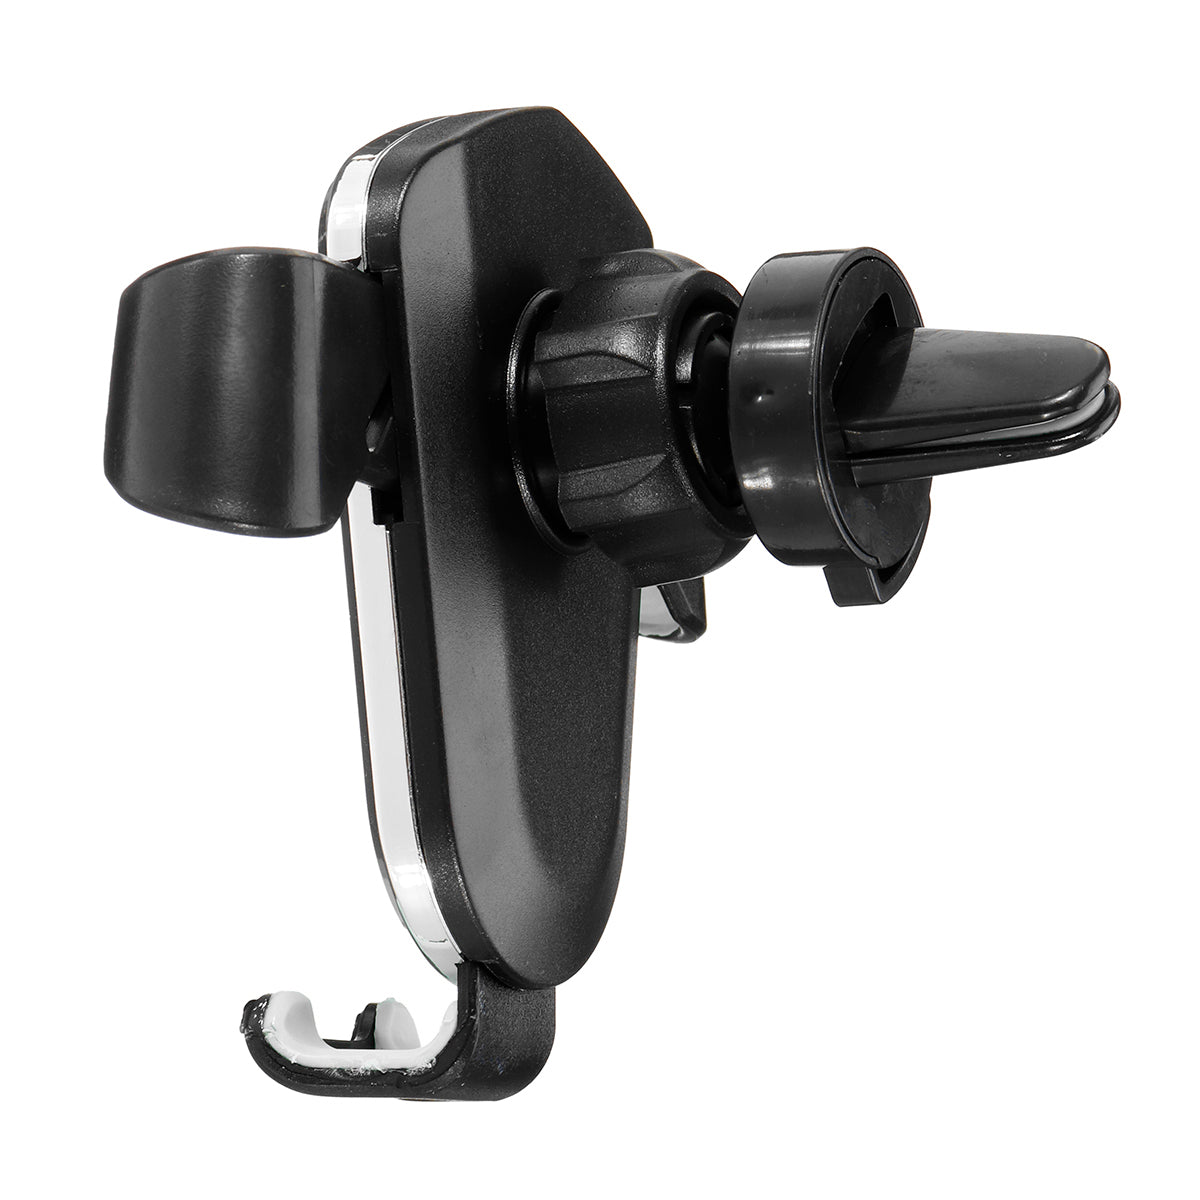 Universal Gravity Linkage Auto Lock Car Air Vent Mount Dashboard Holder for iPhone Xiaomi Mobile Phone